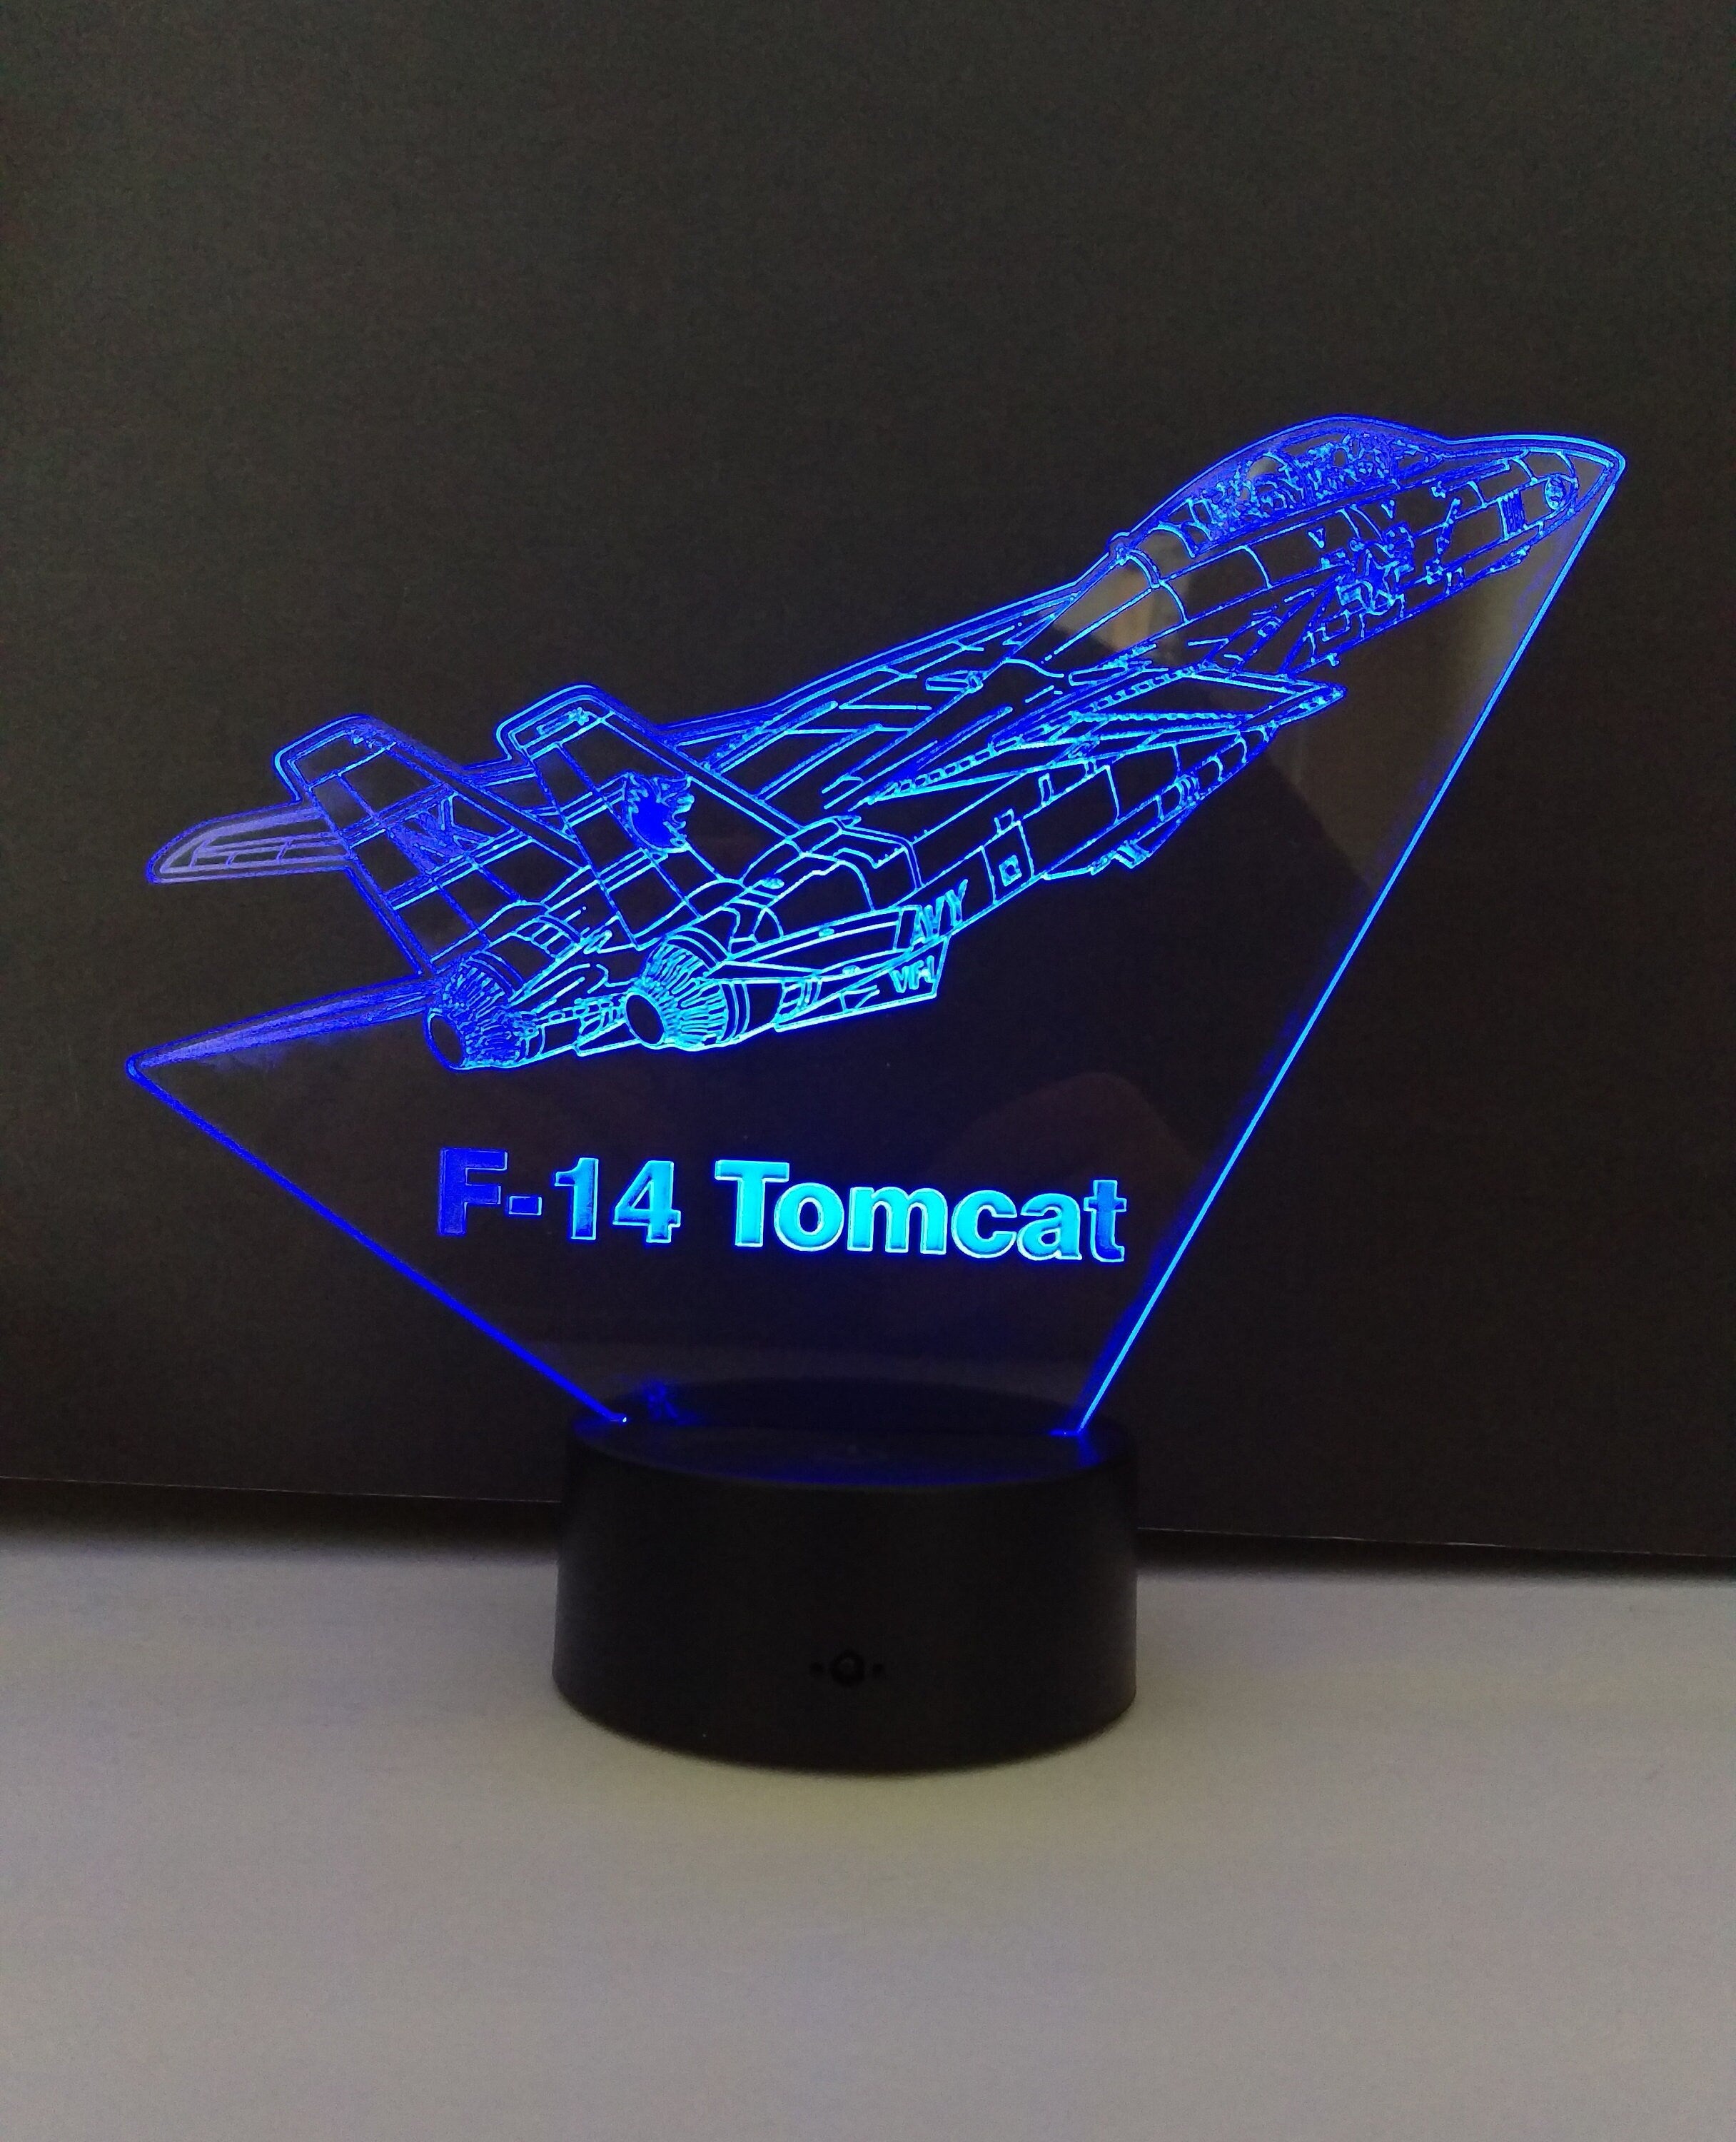 Awesome 3D "Grumman F-14A Tomcat" LED Lamp (1153) - FREE SHIPPING!